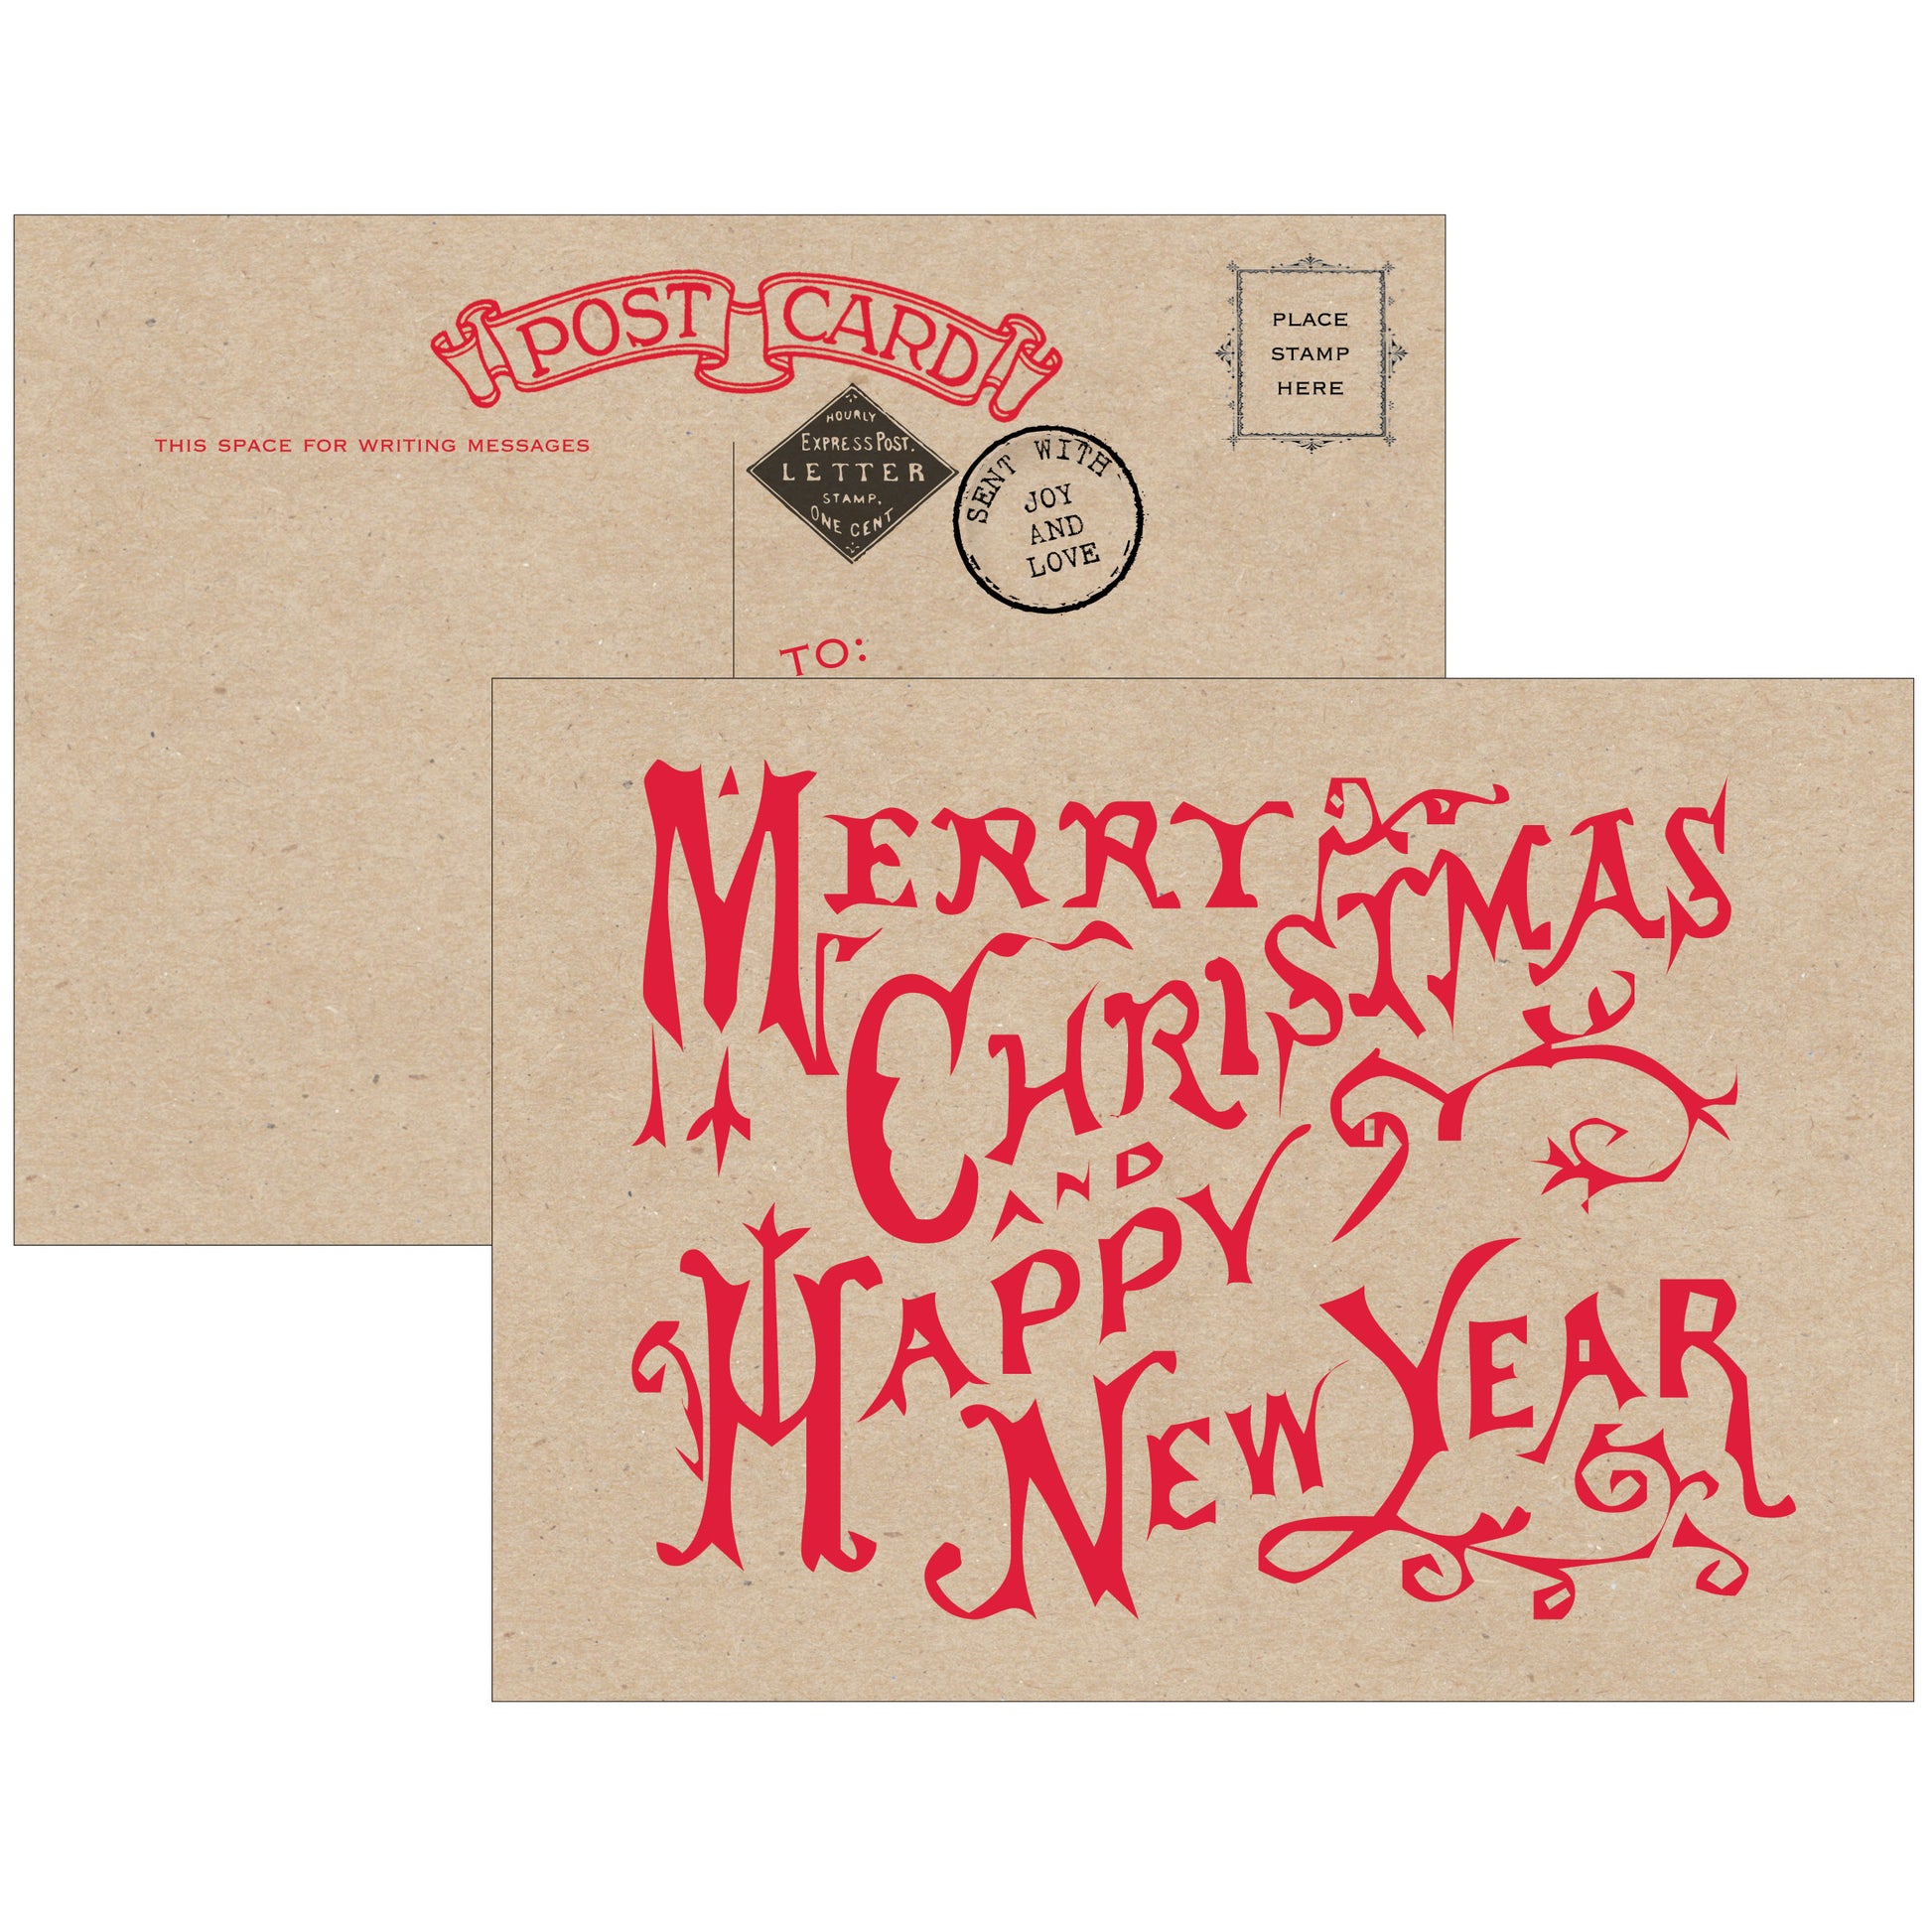 Vintage Style Merry Christmas & Happy New Year Postcards - Pack of